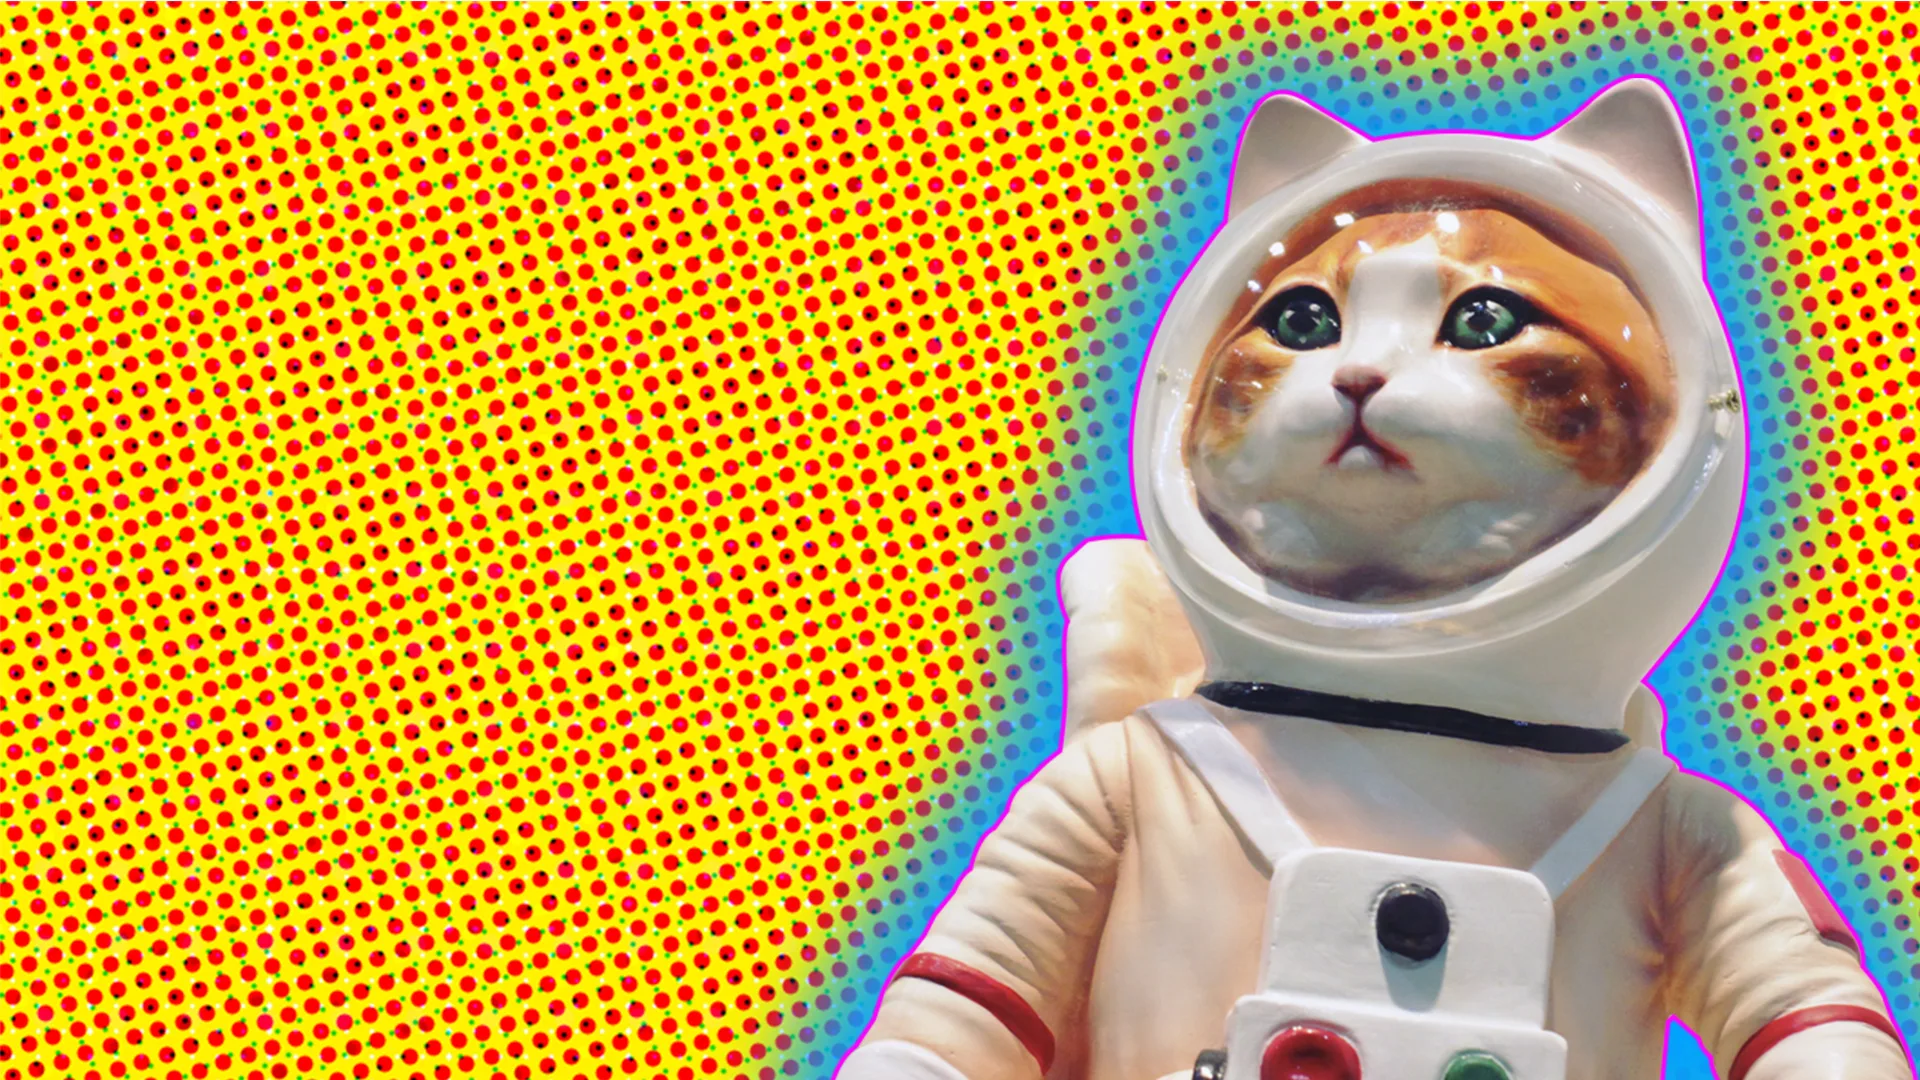 Astronaut cat - in graphic house style